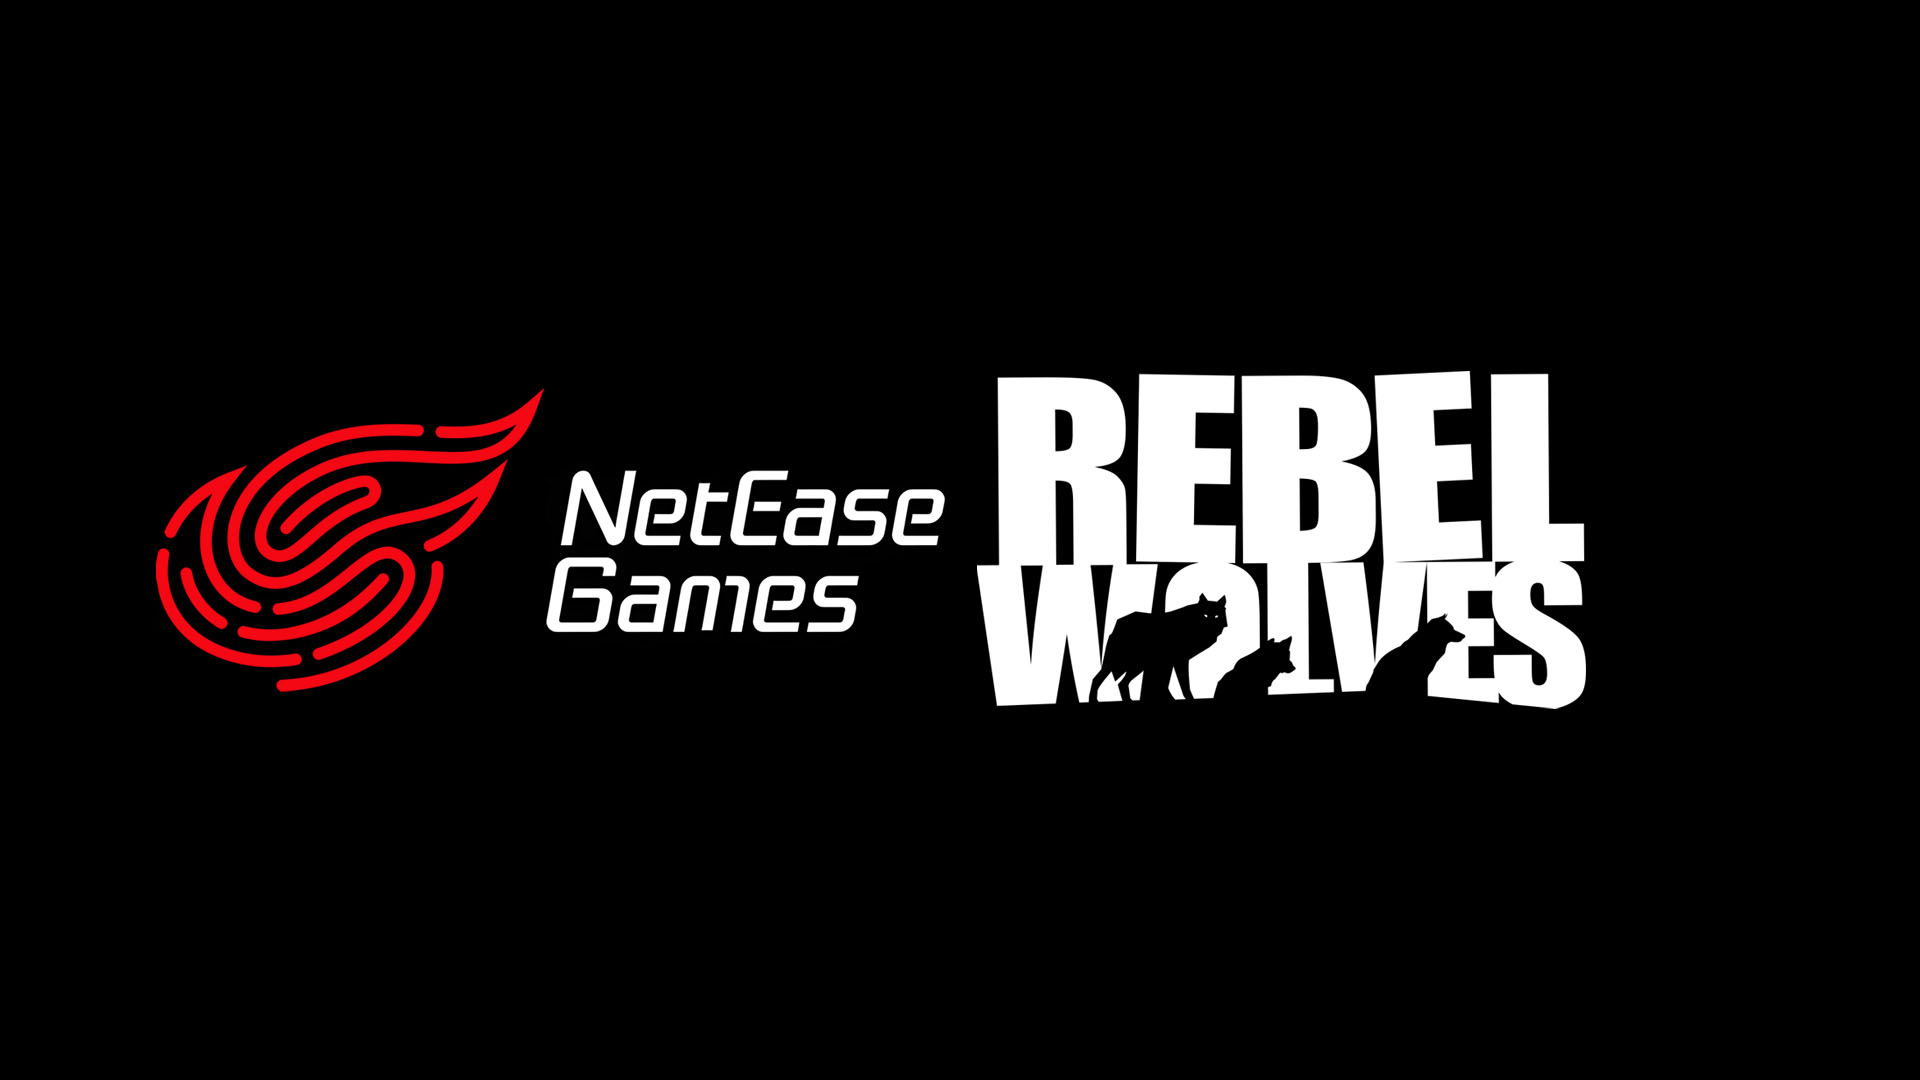 Rebel Wolves gets investment / minority stake from NetEase Games